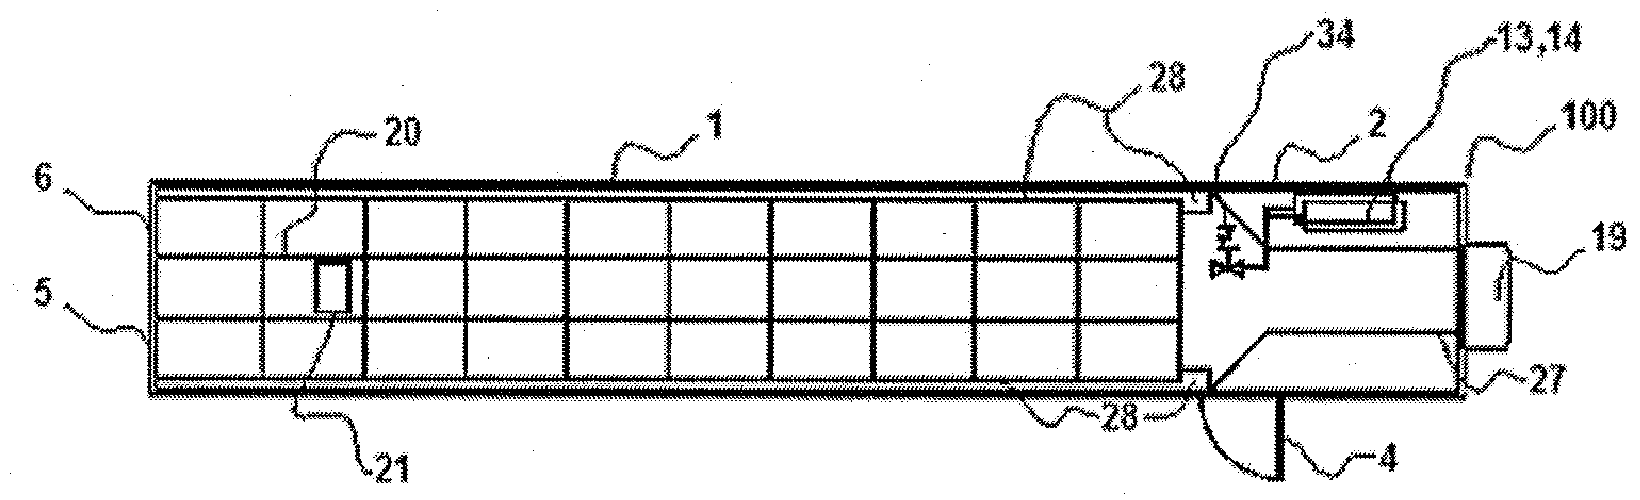 Method for the Preservation and Transportation of Products Including Live Aquatic Species